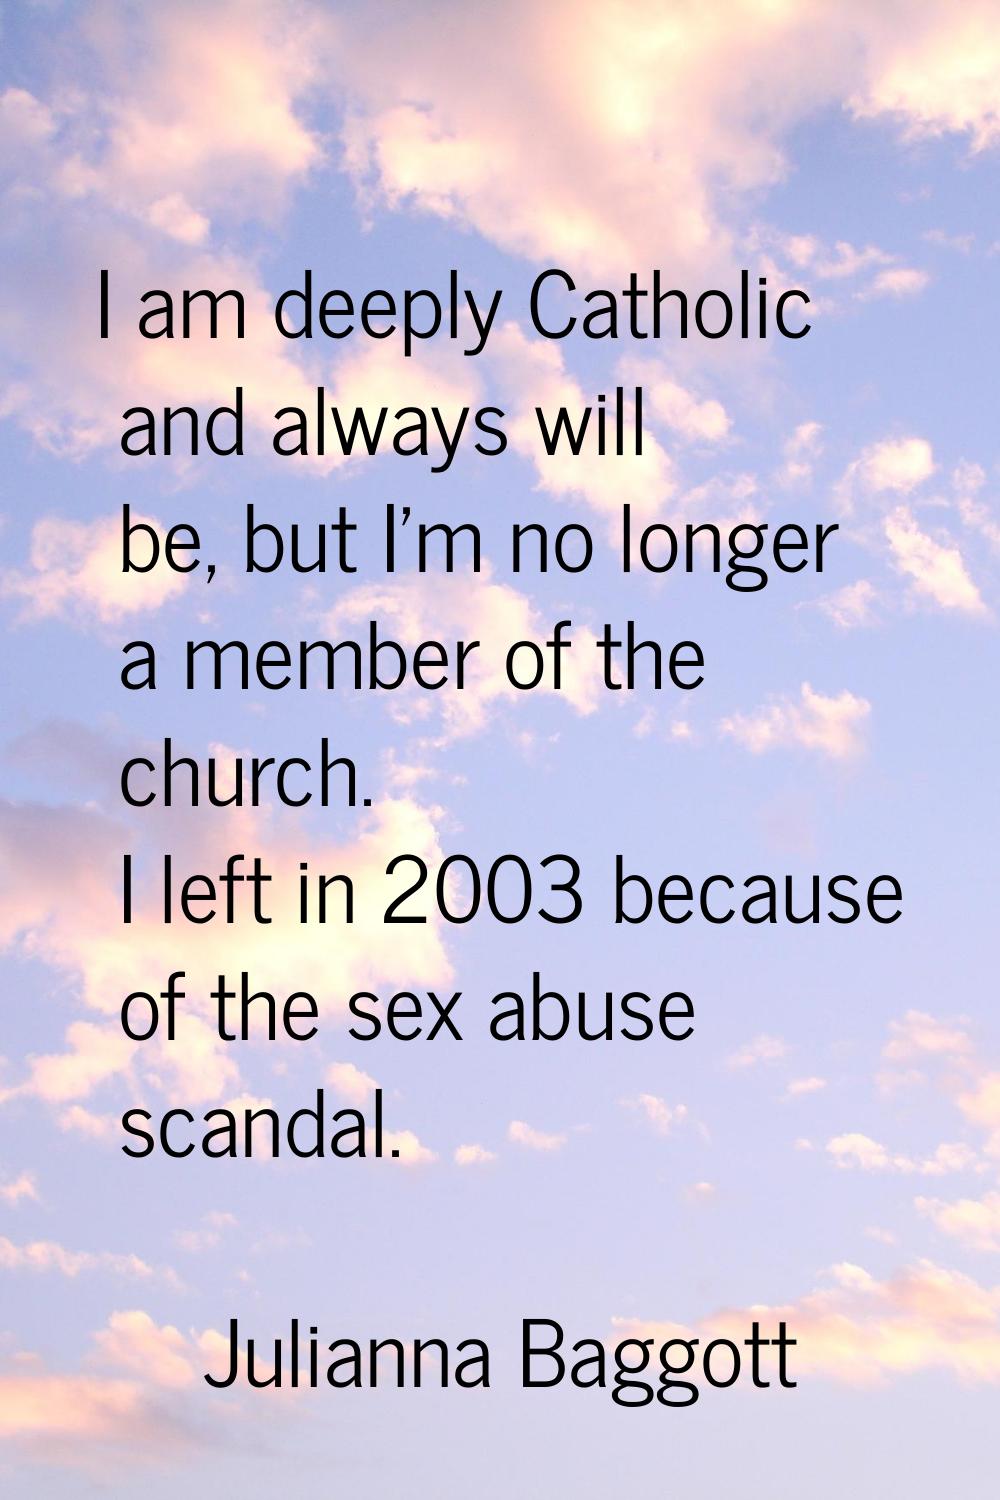 I am deeply Catholic and always will be, but I'm no longer a member of the church. I left in 2003 b